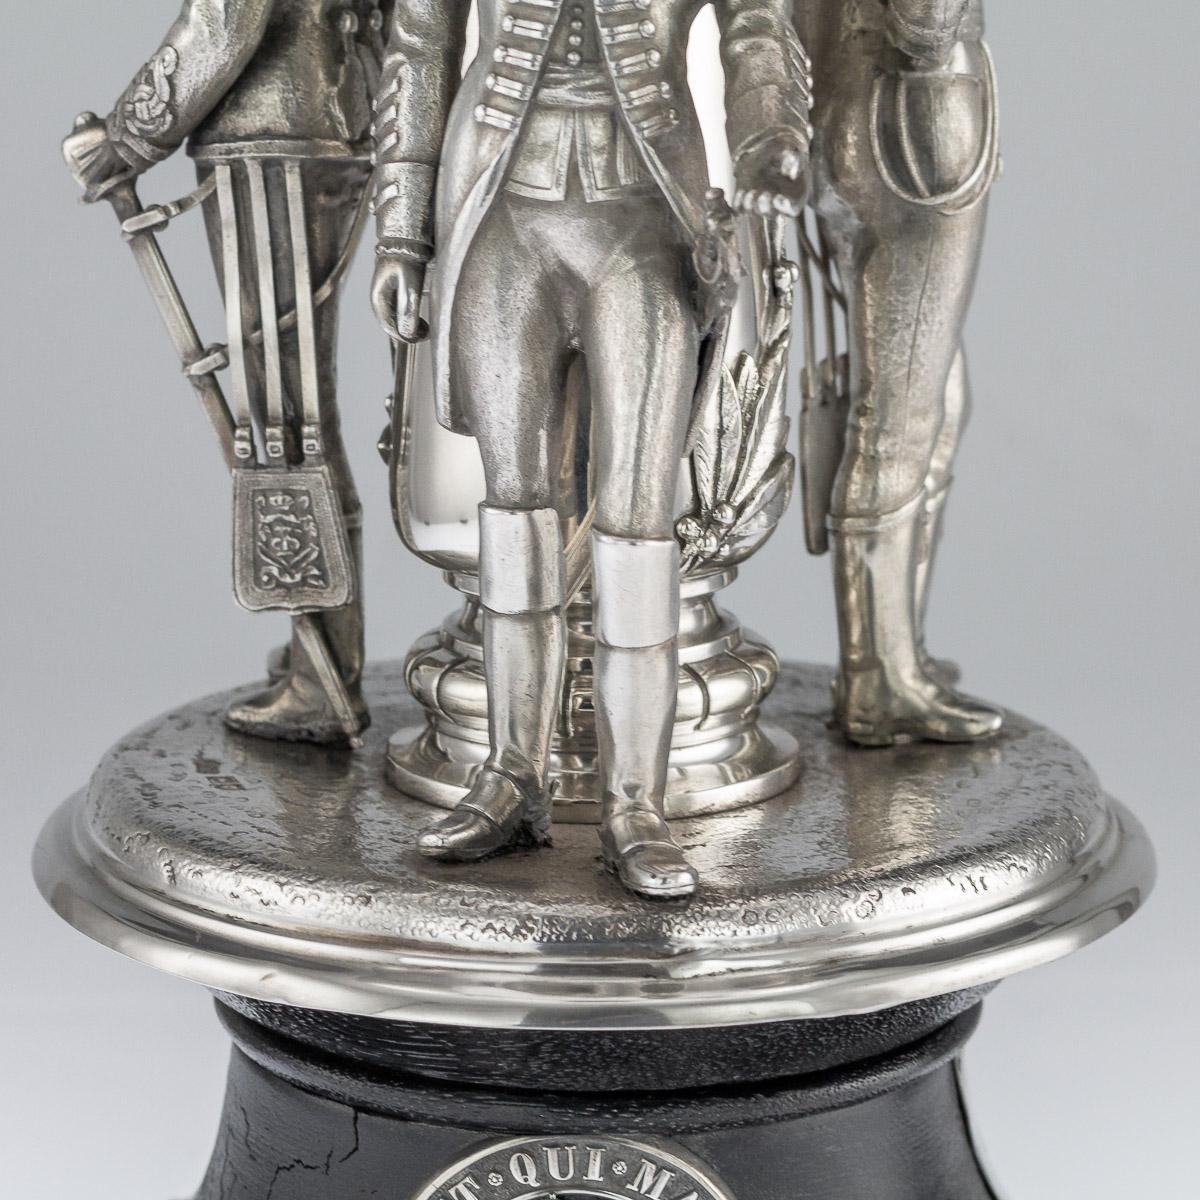 20th Century Edwardian Solid Silver 'Kings Hussars' Centrepiece circa 1914 8